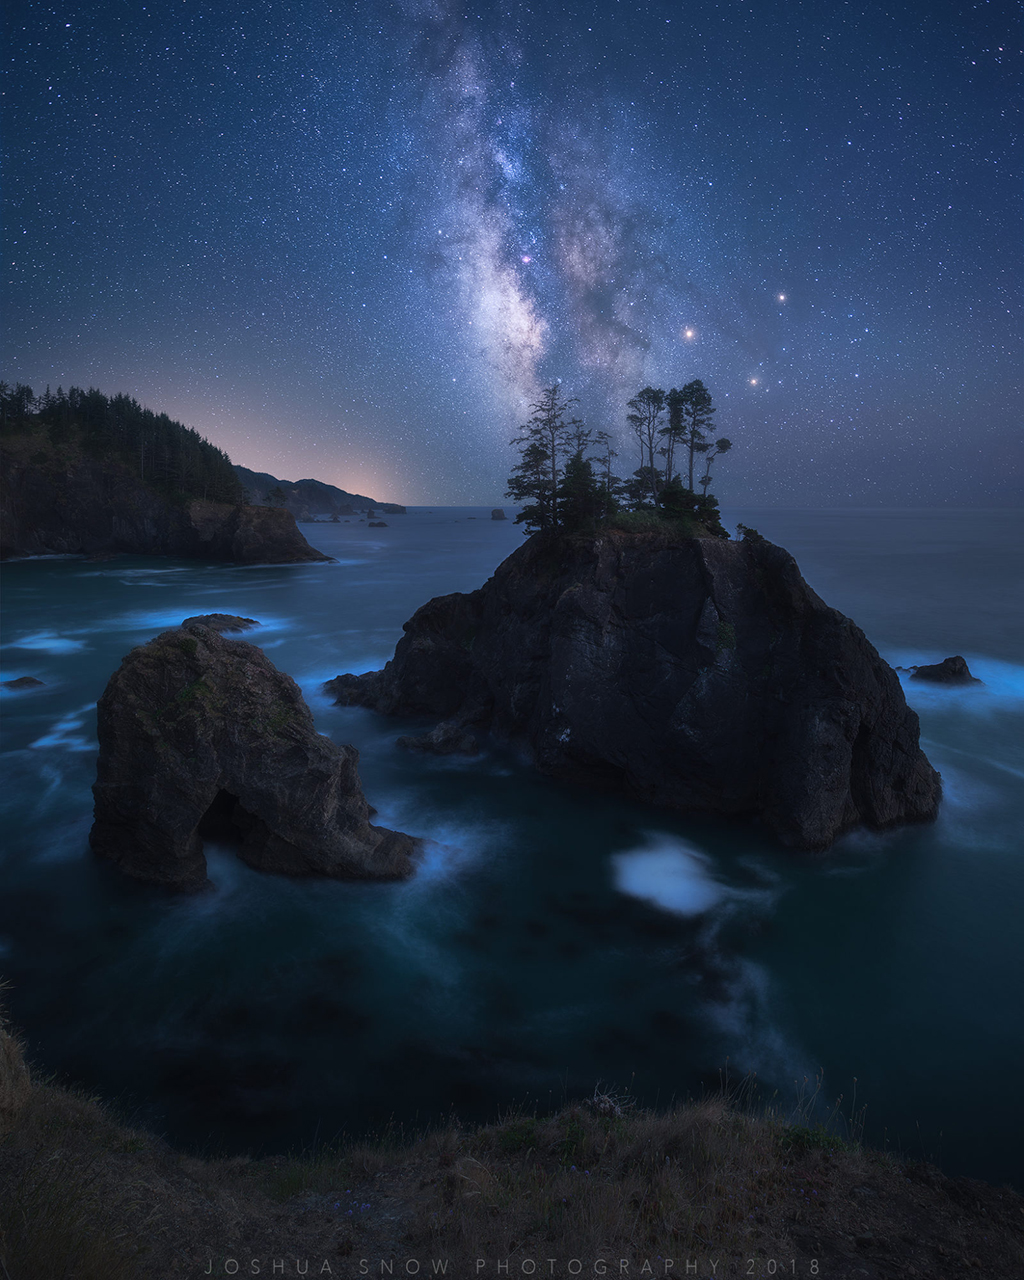 Today’s Photo Of The Day is “Genesis” by Joshua Snow. Location: Oregon.